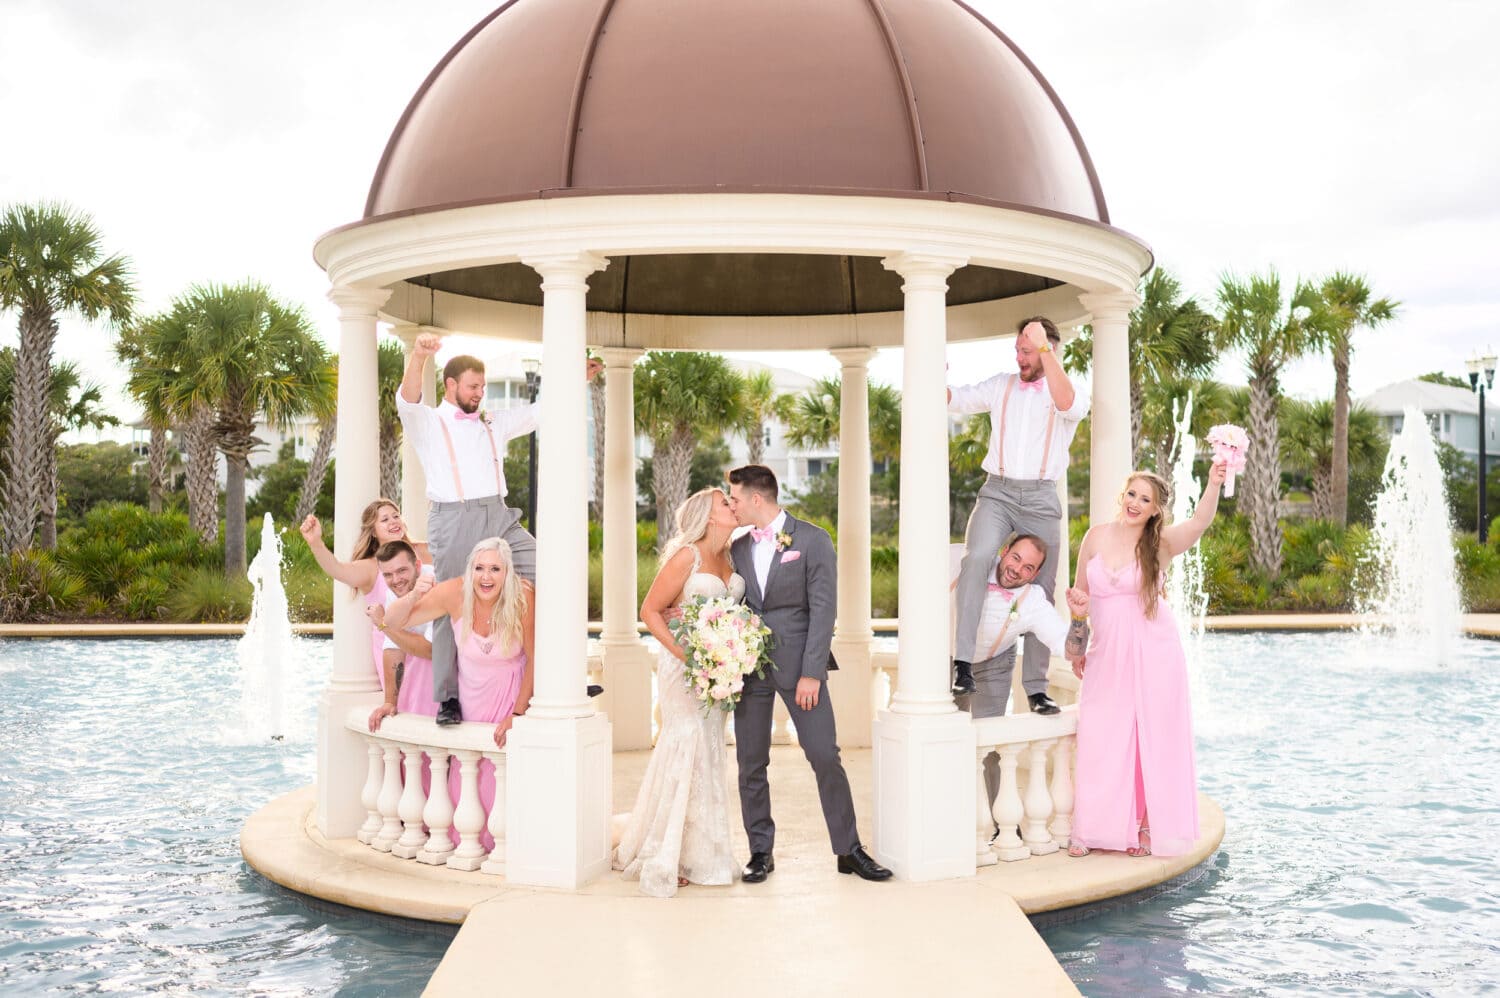 Kiss under the gazebo with the bridal party - 21 Main Events at North Beach